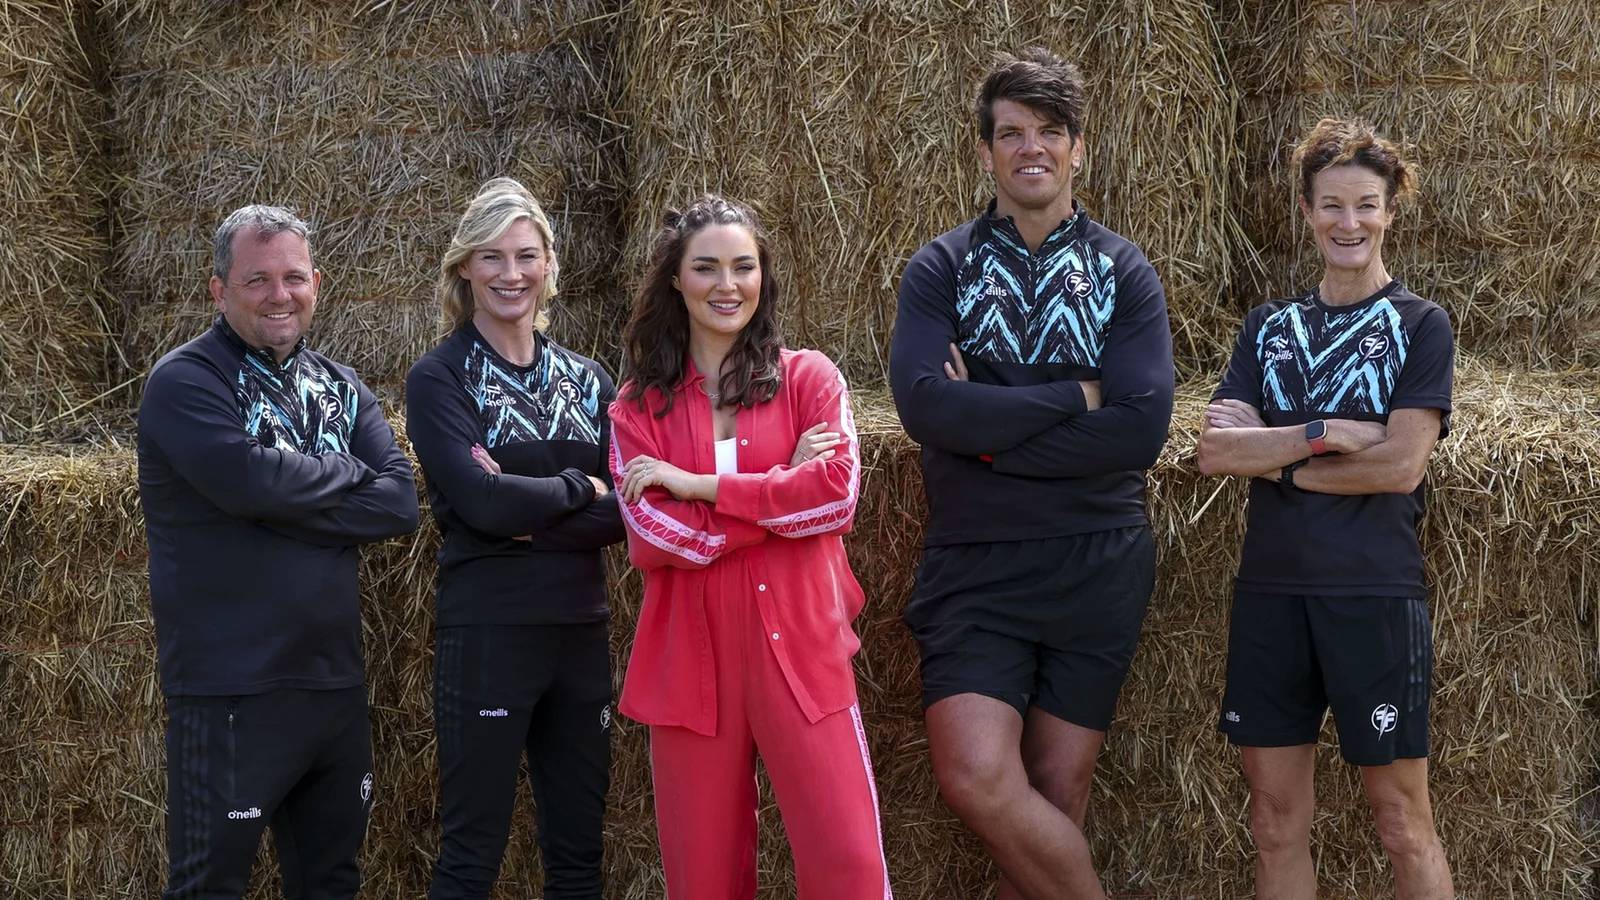 Ireland's Fittest Family returns with Davy Fitzgerald, Nina Carberry, Laura Fox, Donncha O'Callaghan and Sonia O'Sullivan. Photograph: RTÉ